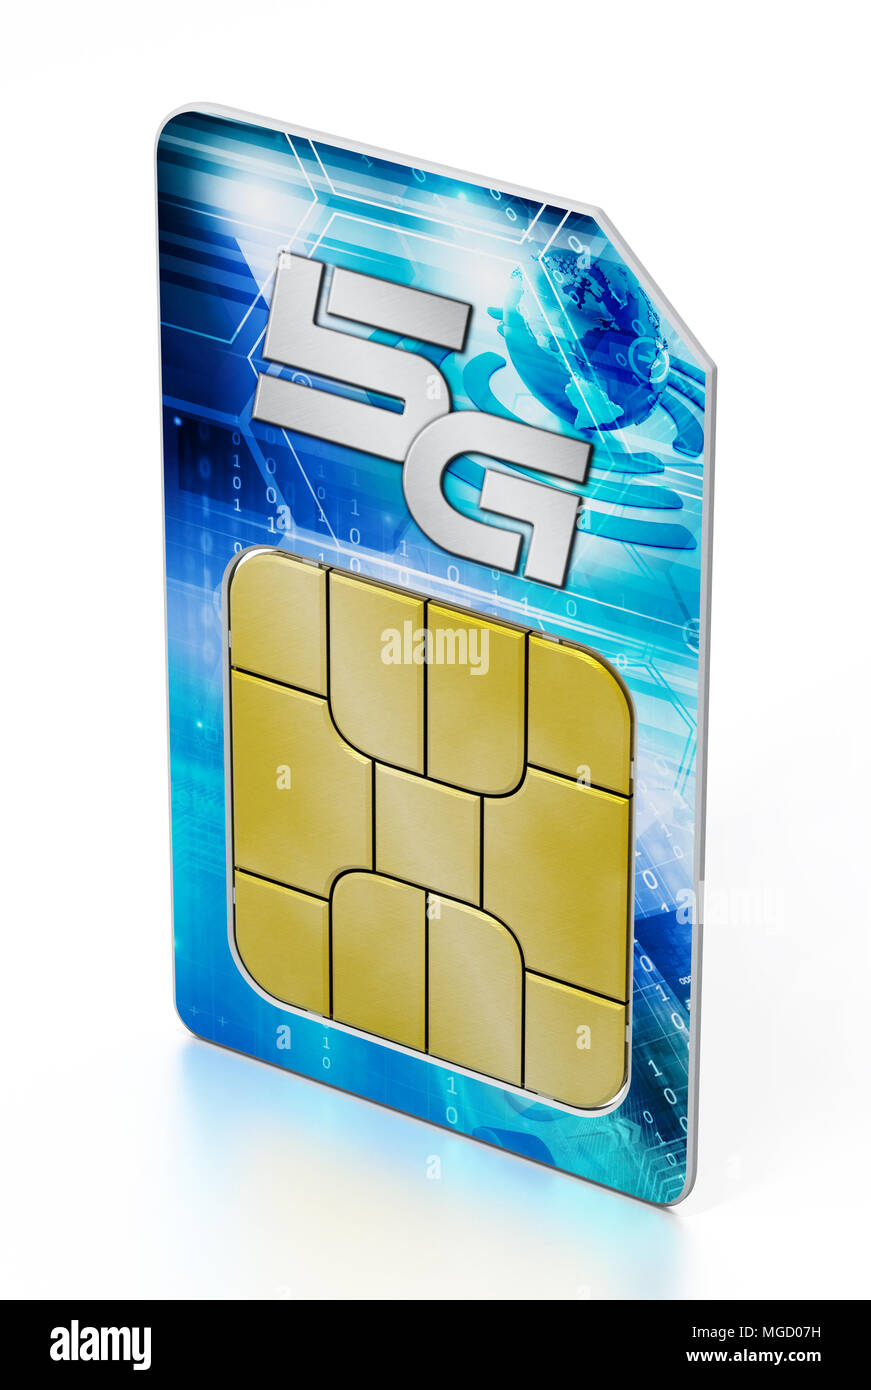 2g, 3g, 4g, 5g, 6g Circuit Microchip SIM Card Emblem Isolated Over White  Background Stock Photo, Picture and Royalty Free Image. Image 19797689.